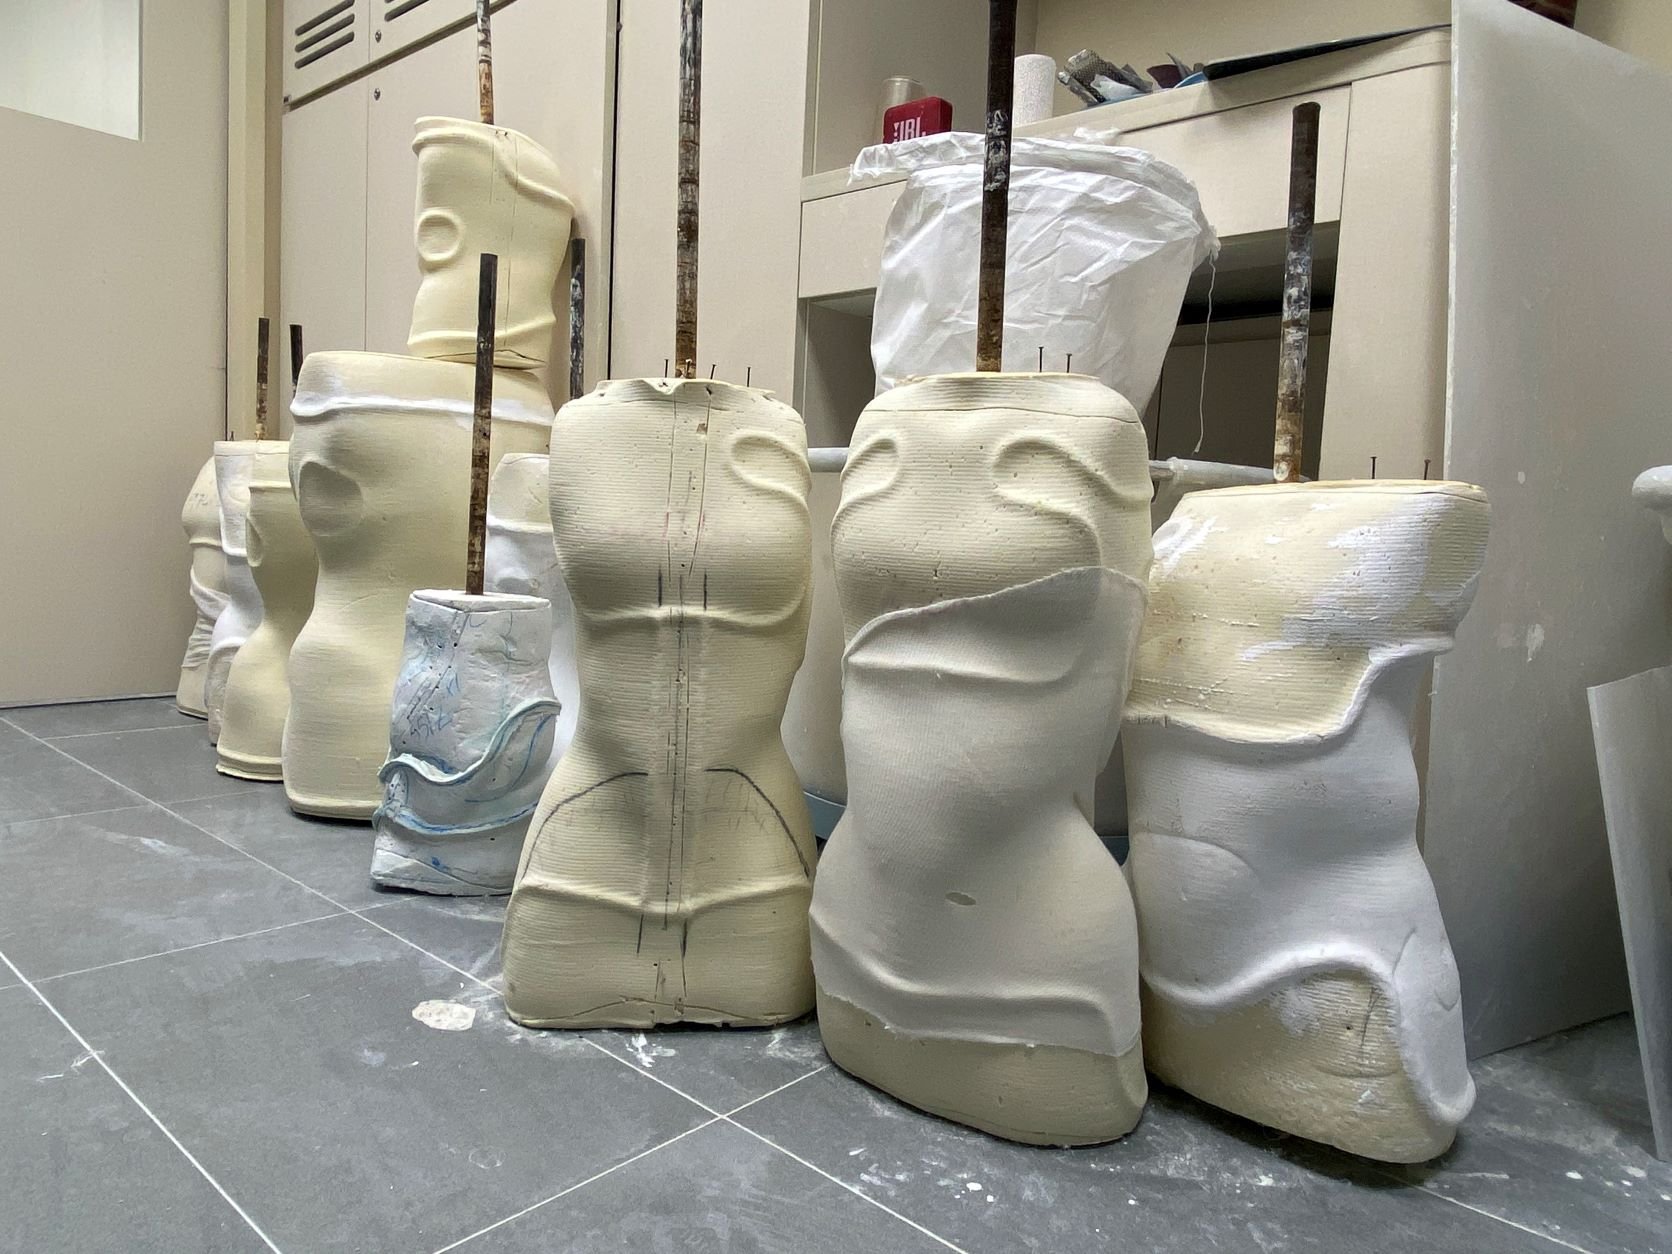  A snapshot of foam bodies in an orthotist’s workspace. Image courtesy of Woong Soak Teng. 